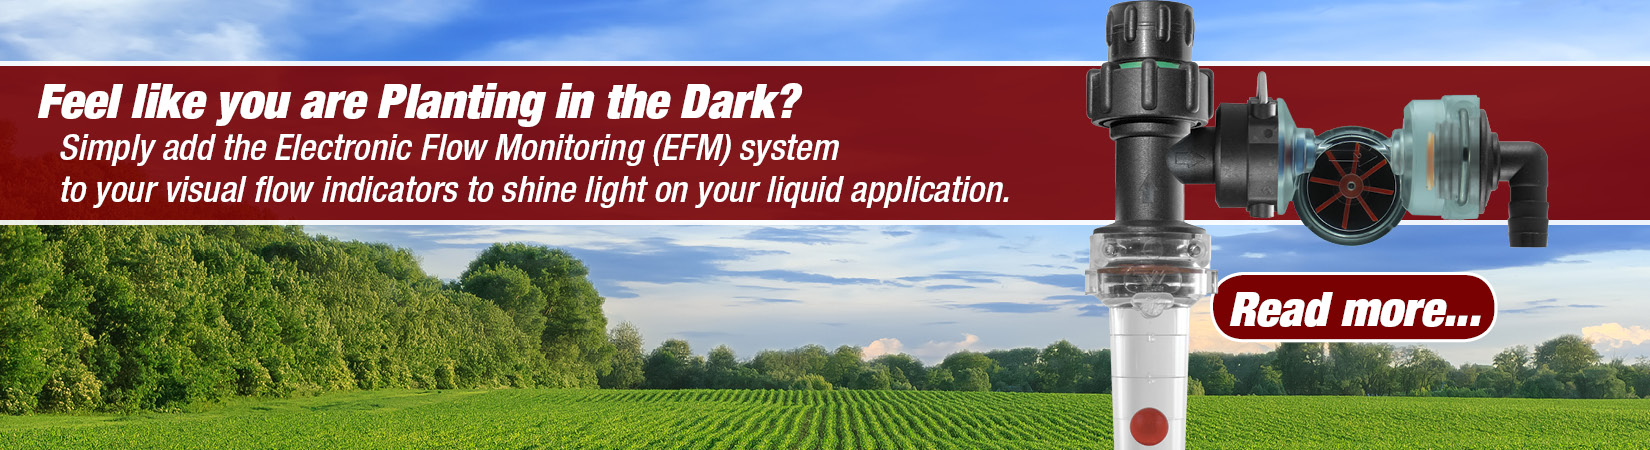 Planting without any feedback can be frustrating, confusing and very time consuming. Using the electronic flowmeters (EFM) can shed a great deal of light into monitoring tough products that are prone to blocking runs, dark liquids like humic acid, copper blends, Paralign, or while applying liquid fertilizer while planting in the dark.